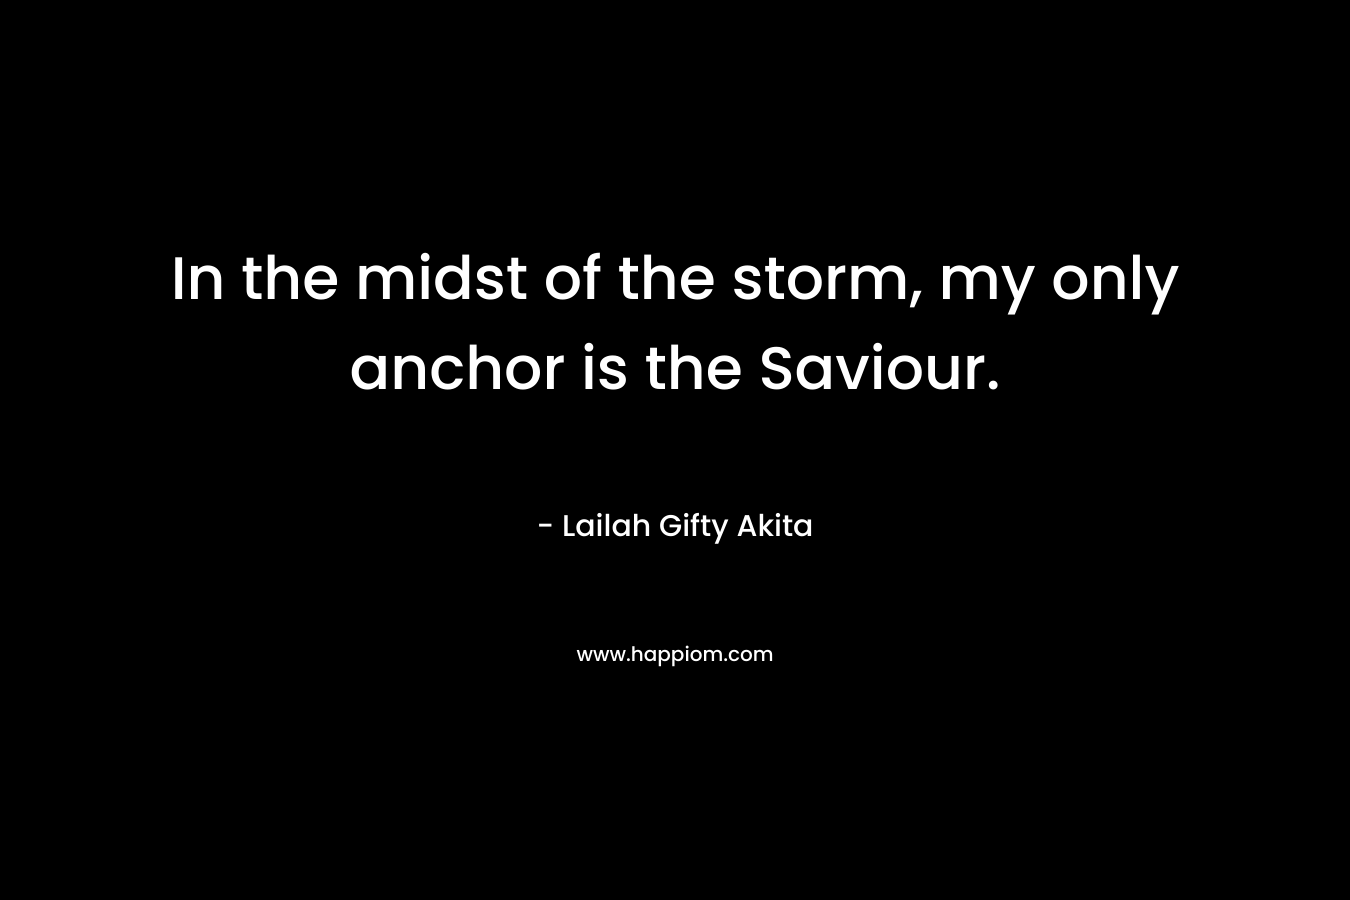 In the midst of the storm, my only anchor is the Saviour.